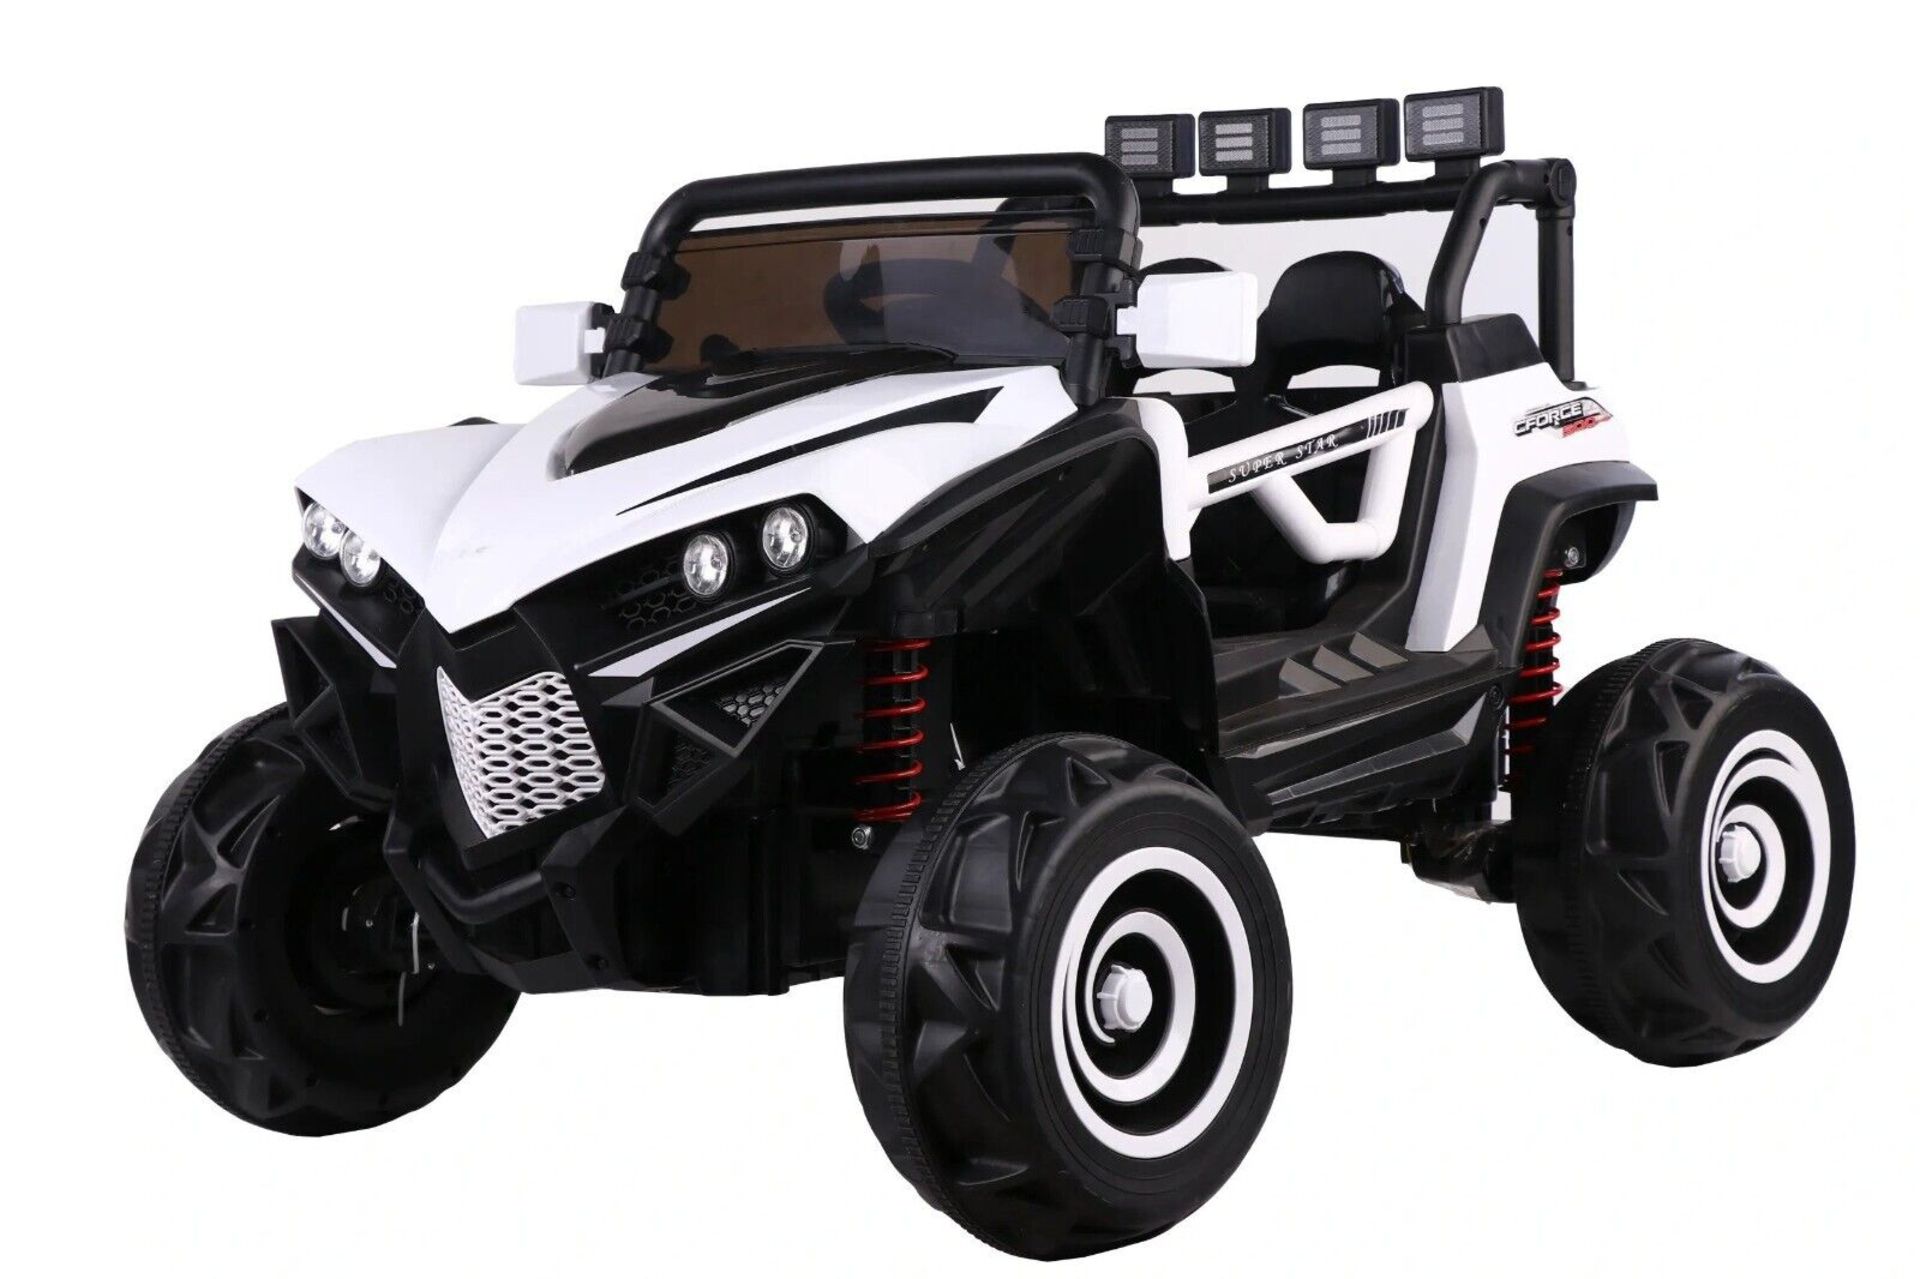 WHITE 4X4 ATV/UTV KIDS BUGGY JEEP ELECTRIC CAR WITH REMOTE BRAND NEW BOXED - Image 2 of 5